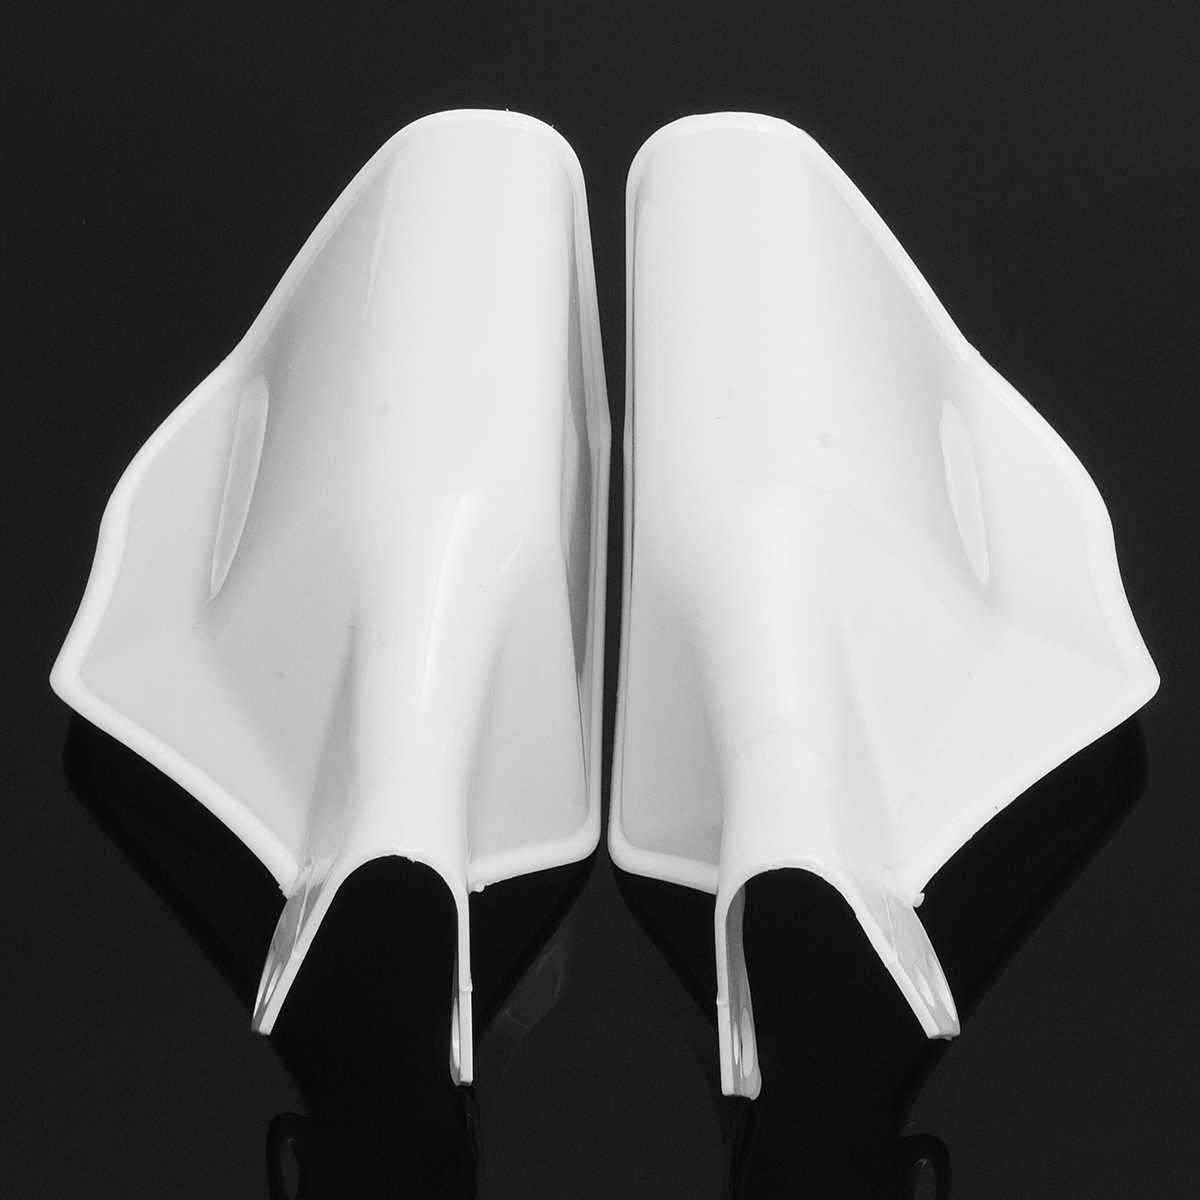 Pair Universal Motorcycle Handguards Hand Guard Shield Scooter Protector Protection: White